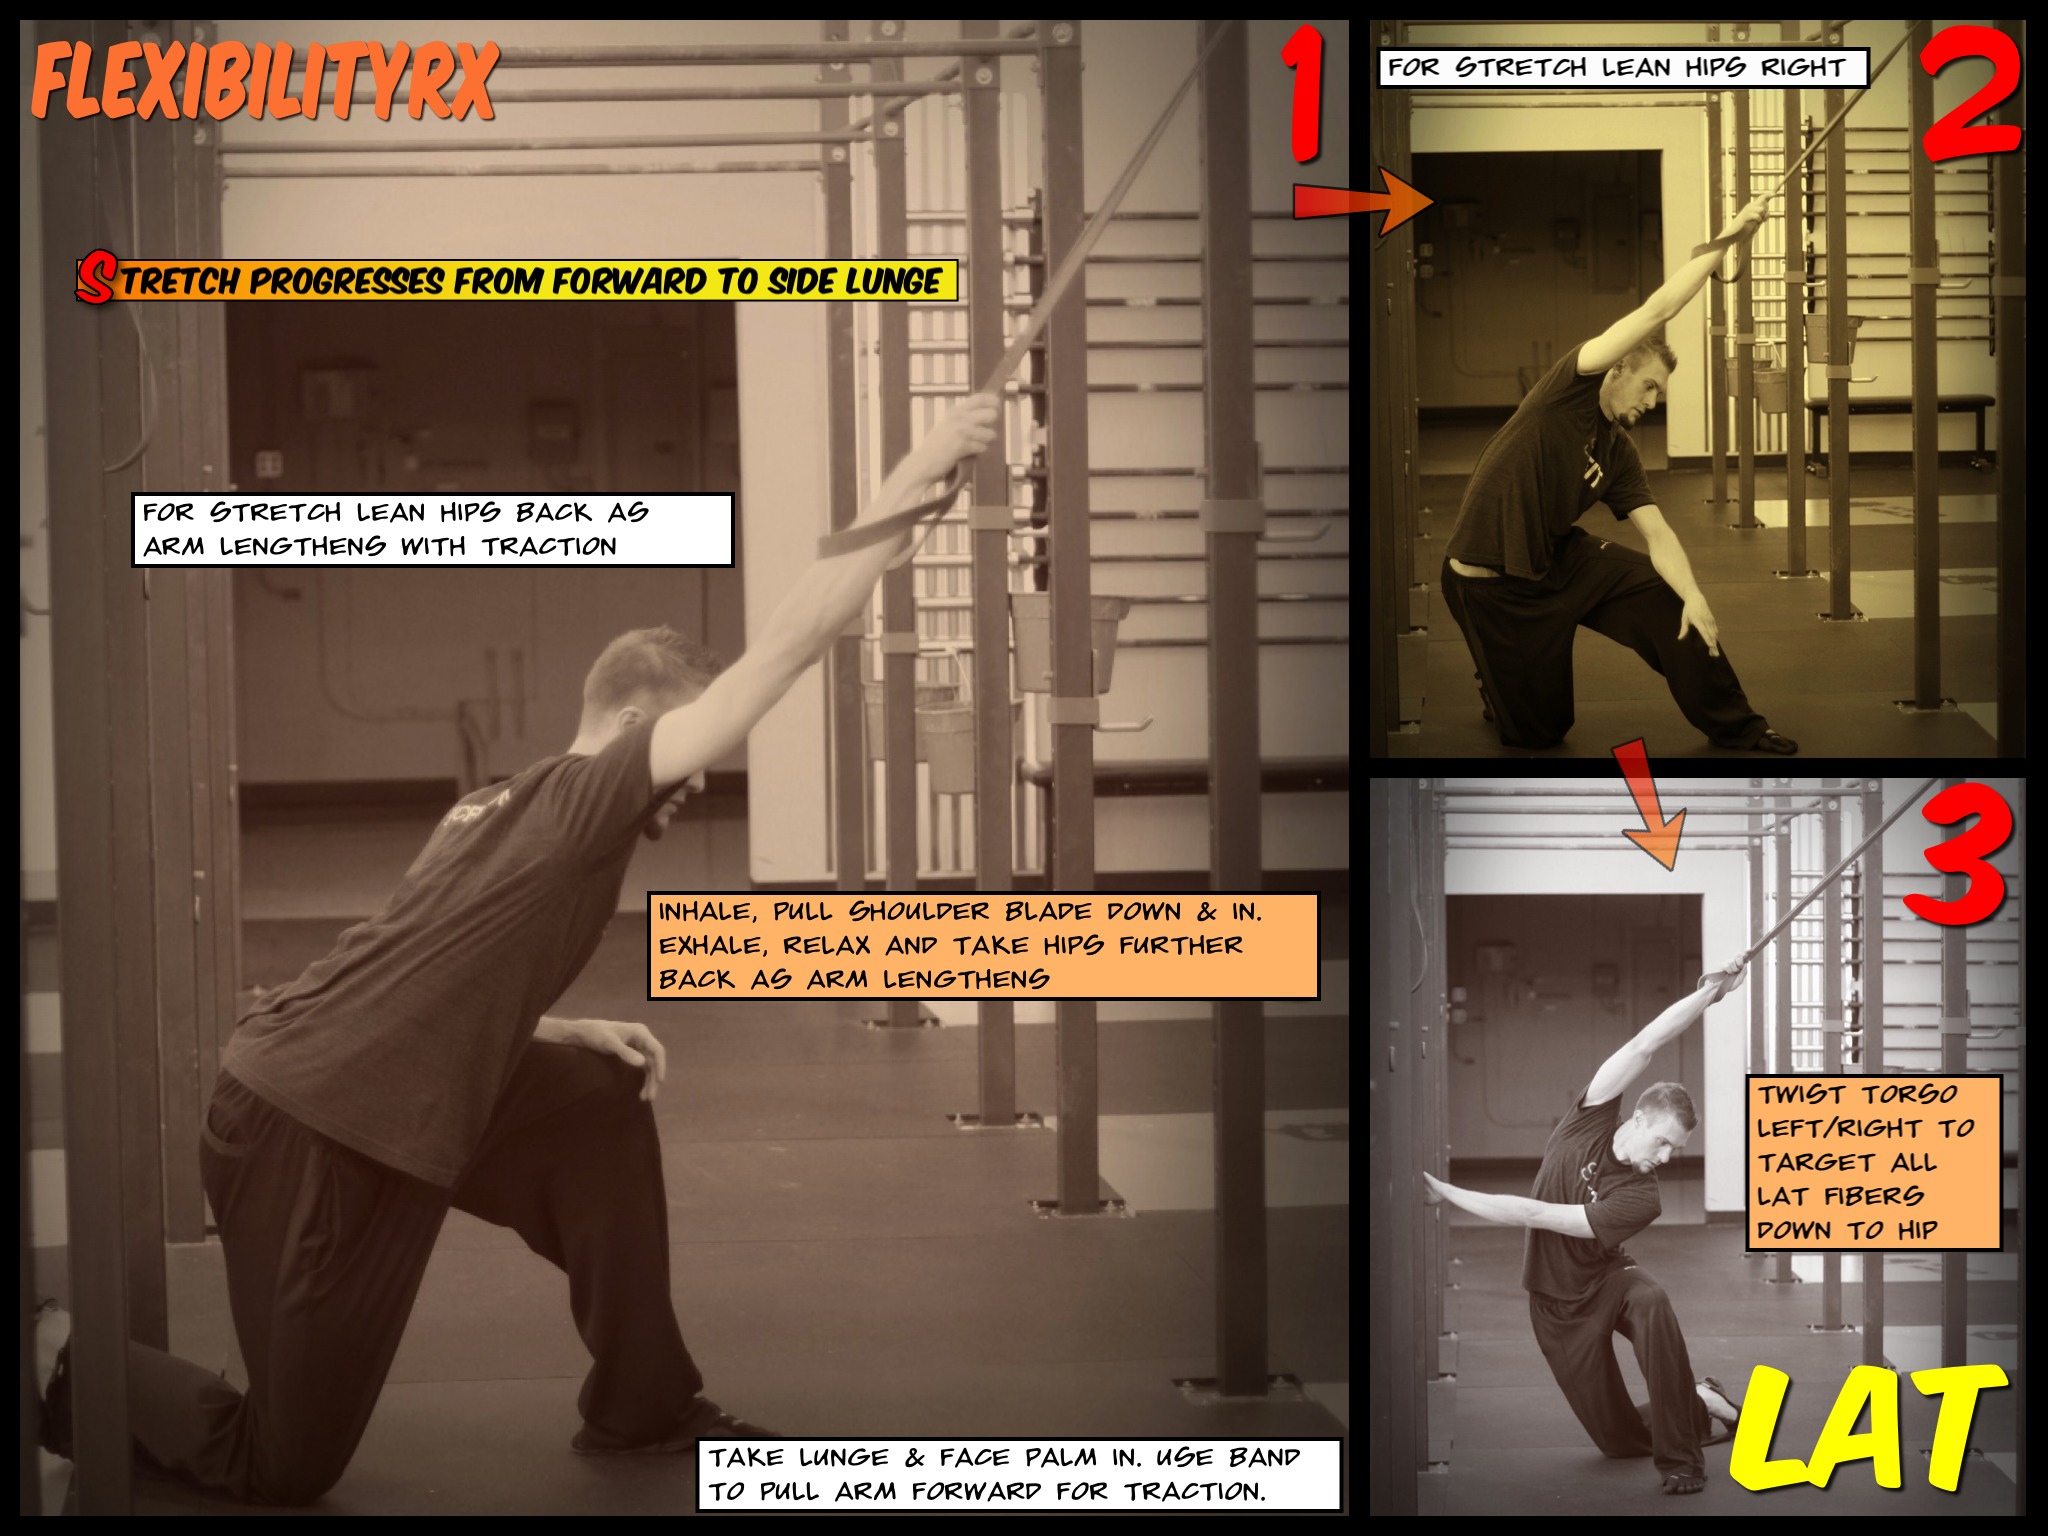 A better lat stretch for the overhead squat